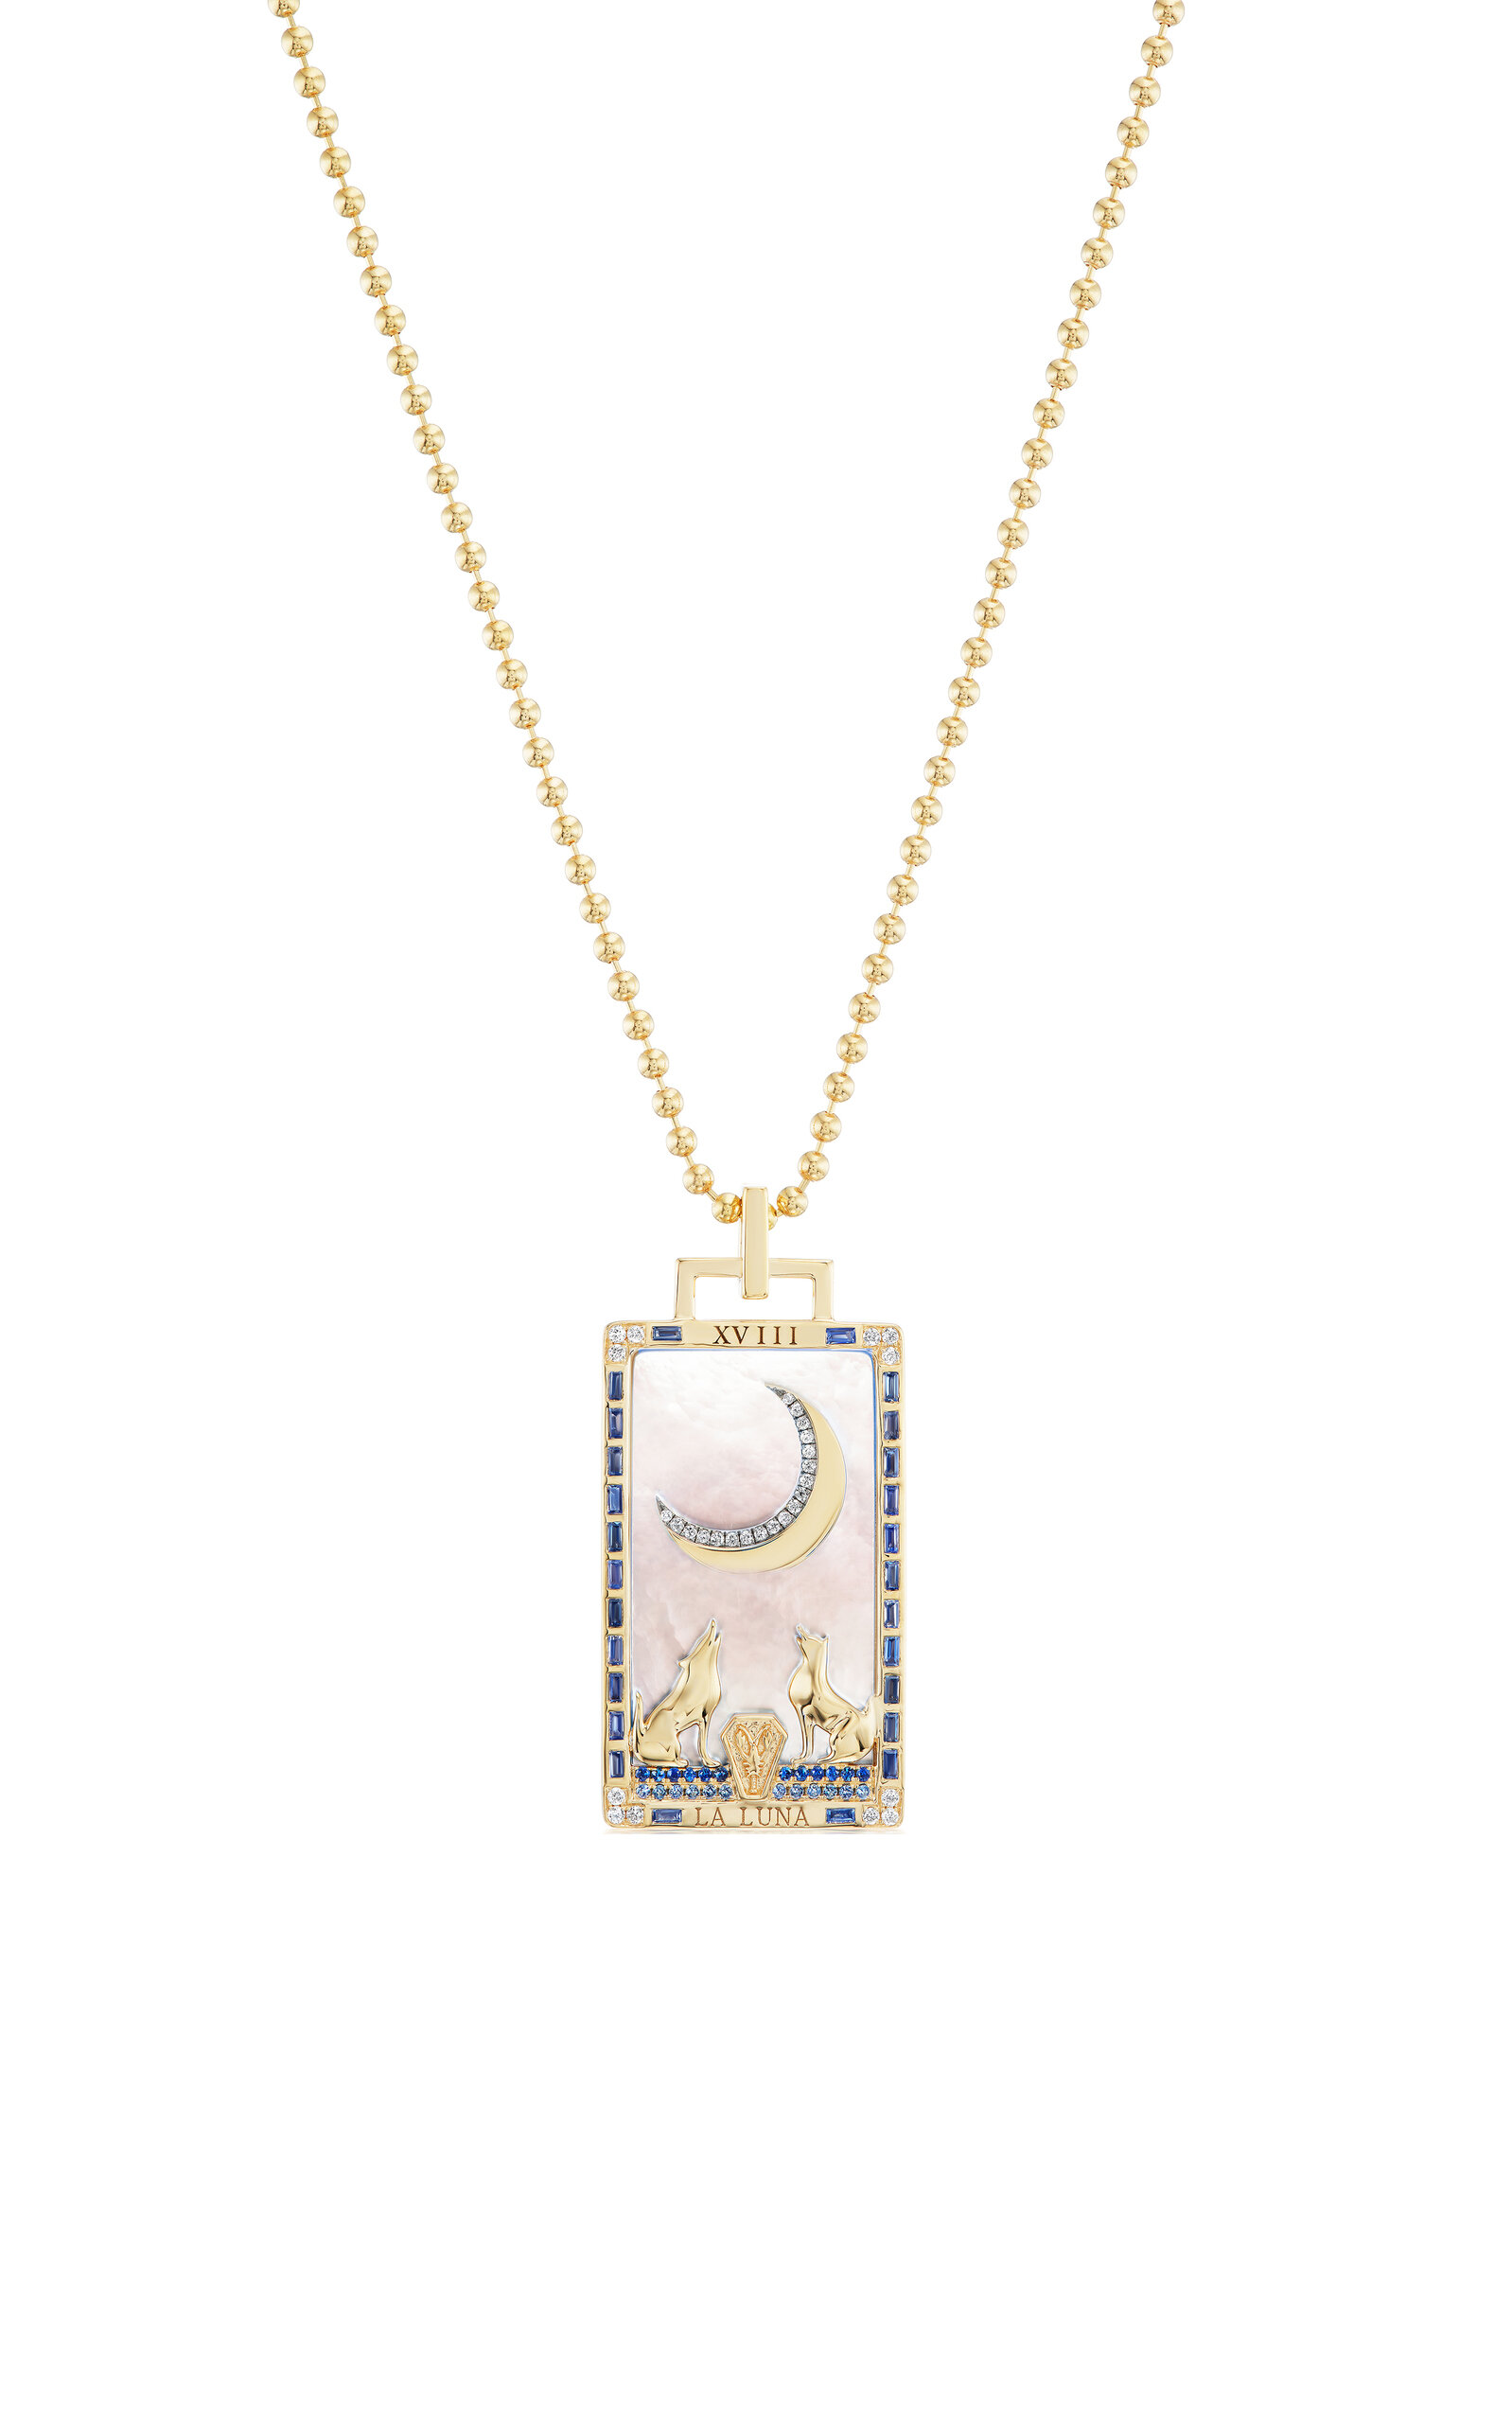 La Luna Piccola 18K Yellow Gold Mother-of-Pearl Tarot Card Necklace